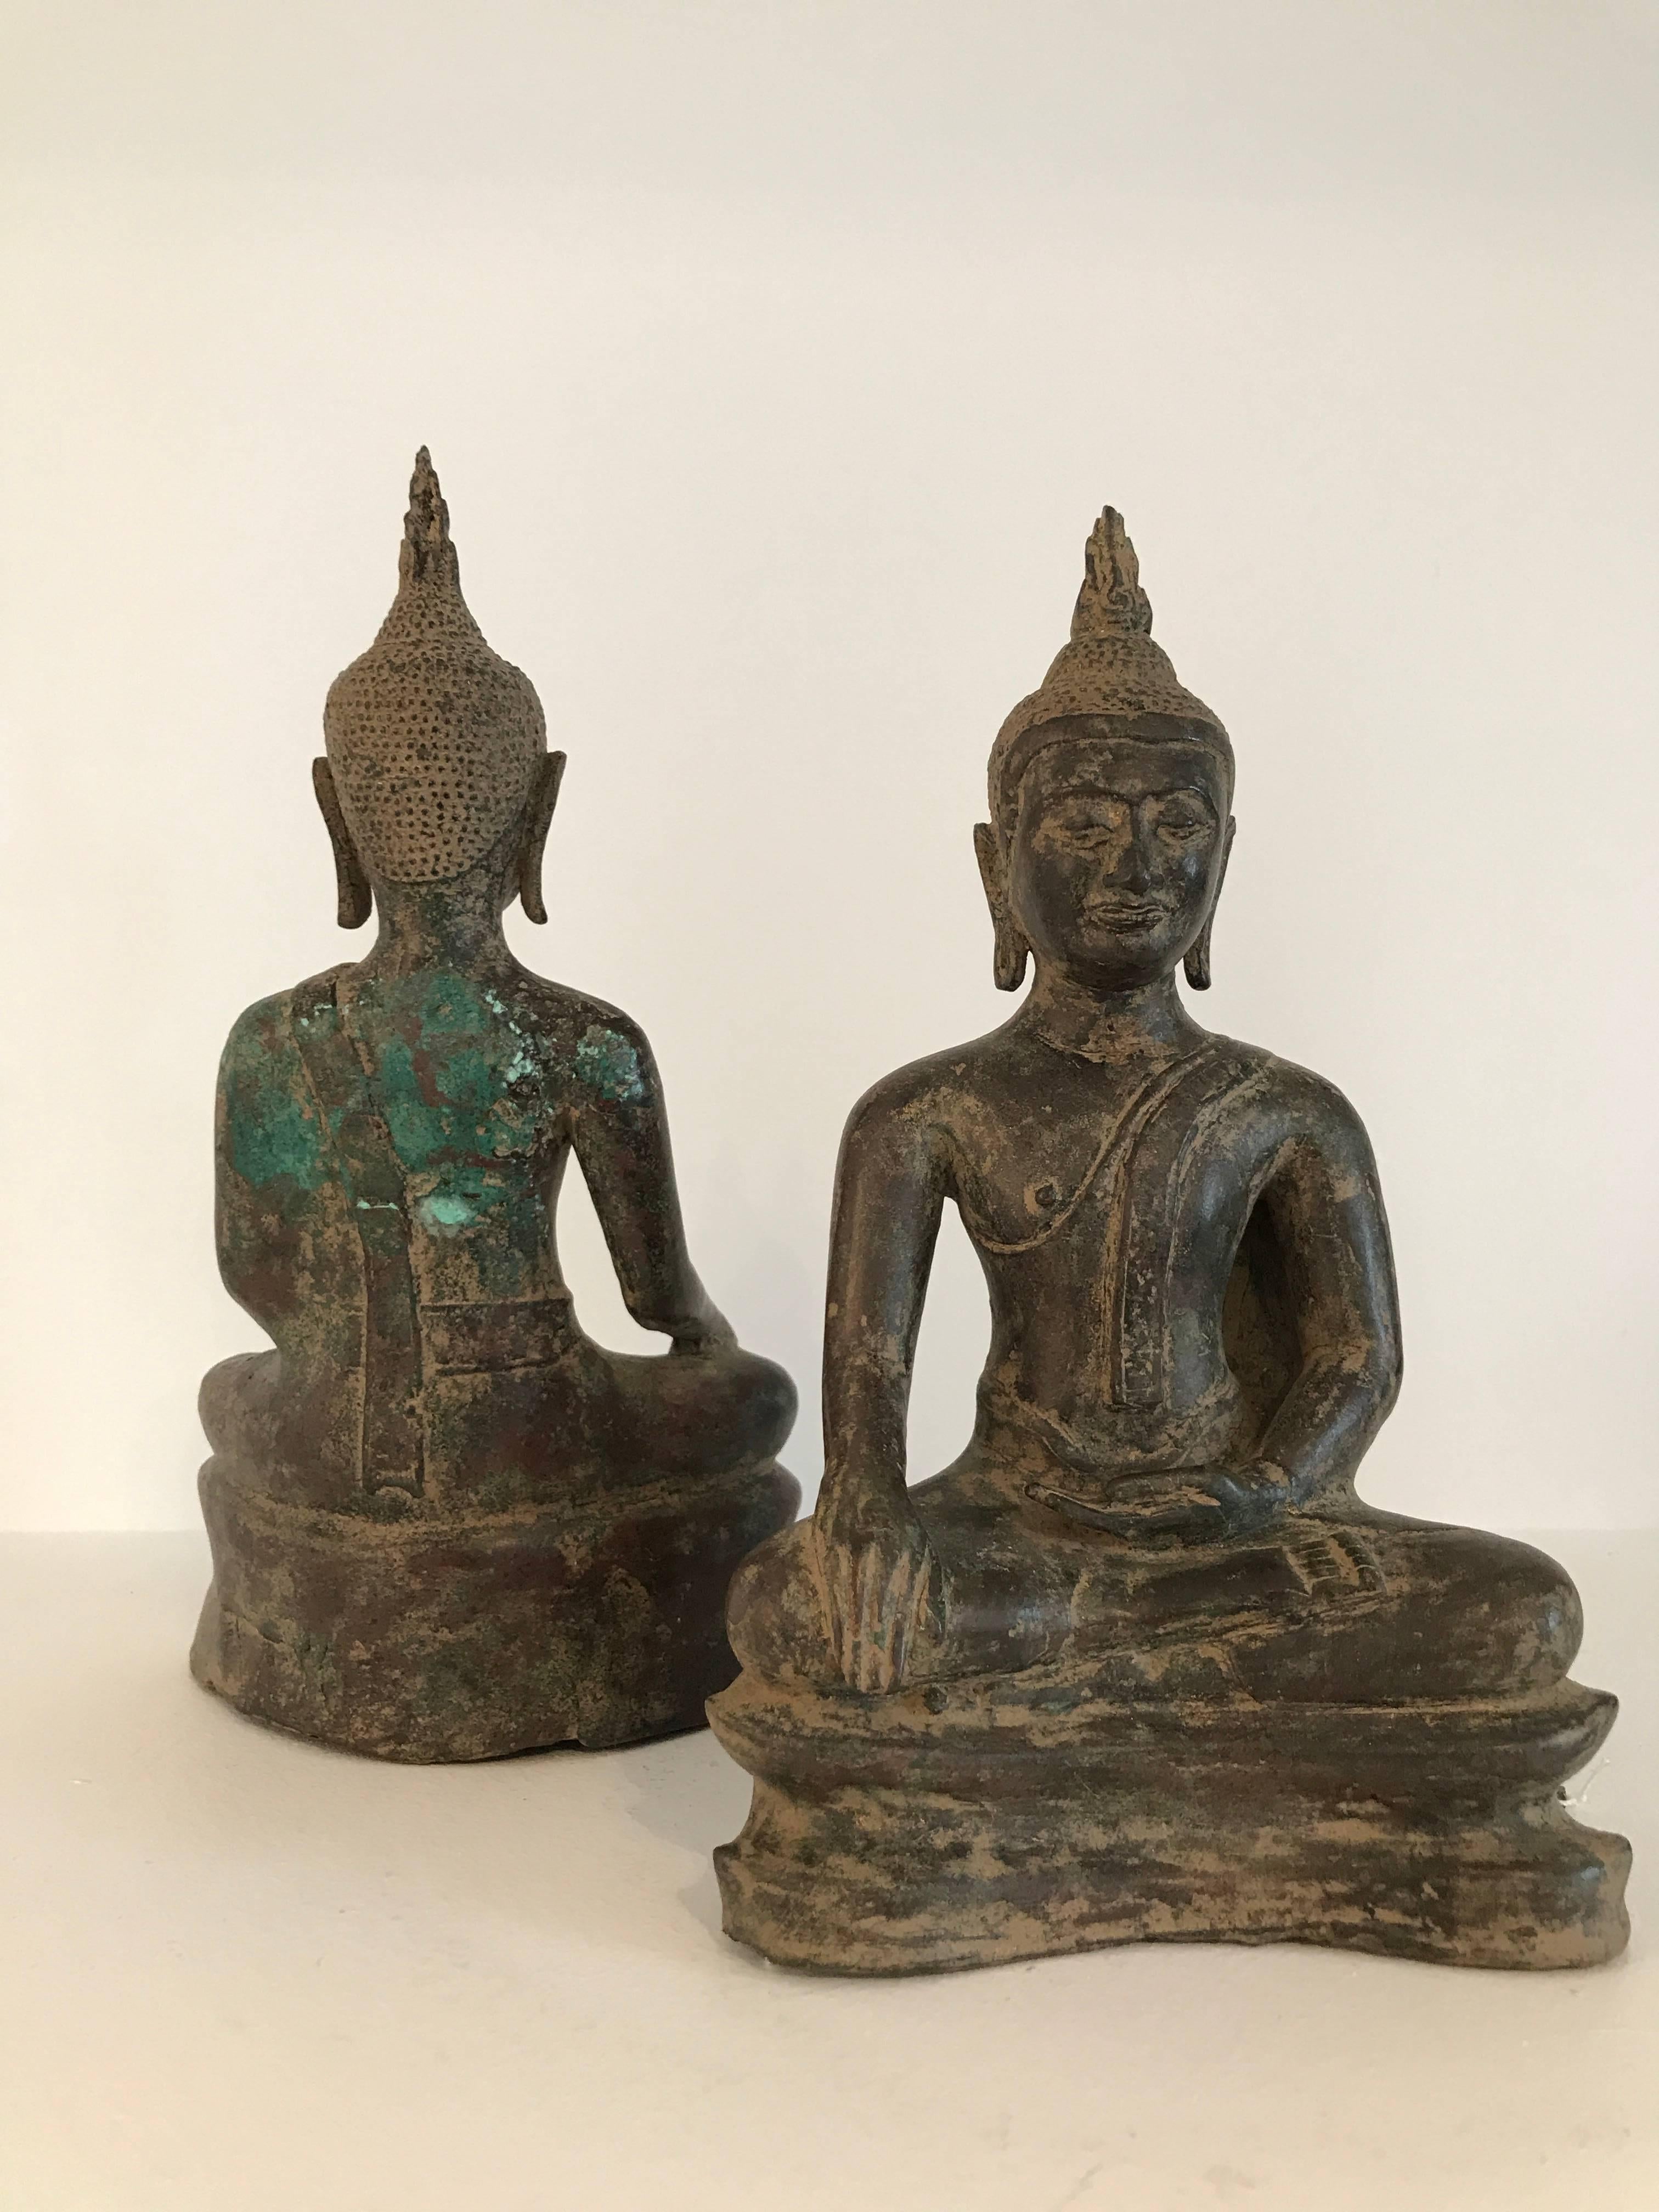 Very Exceptional Almost Identical Pair of Bronze Buddhas In Excellent Condition For Sale In Schellebelle, BE